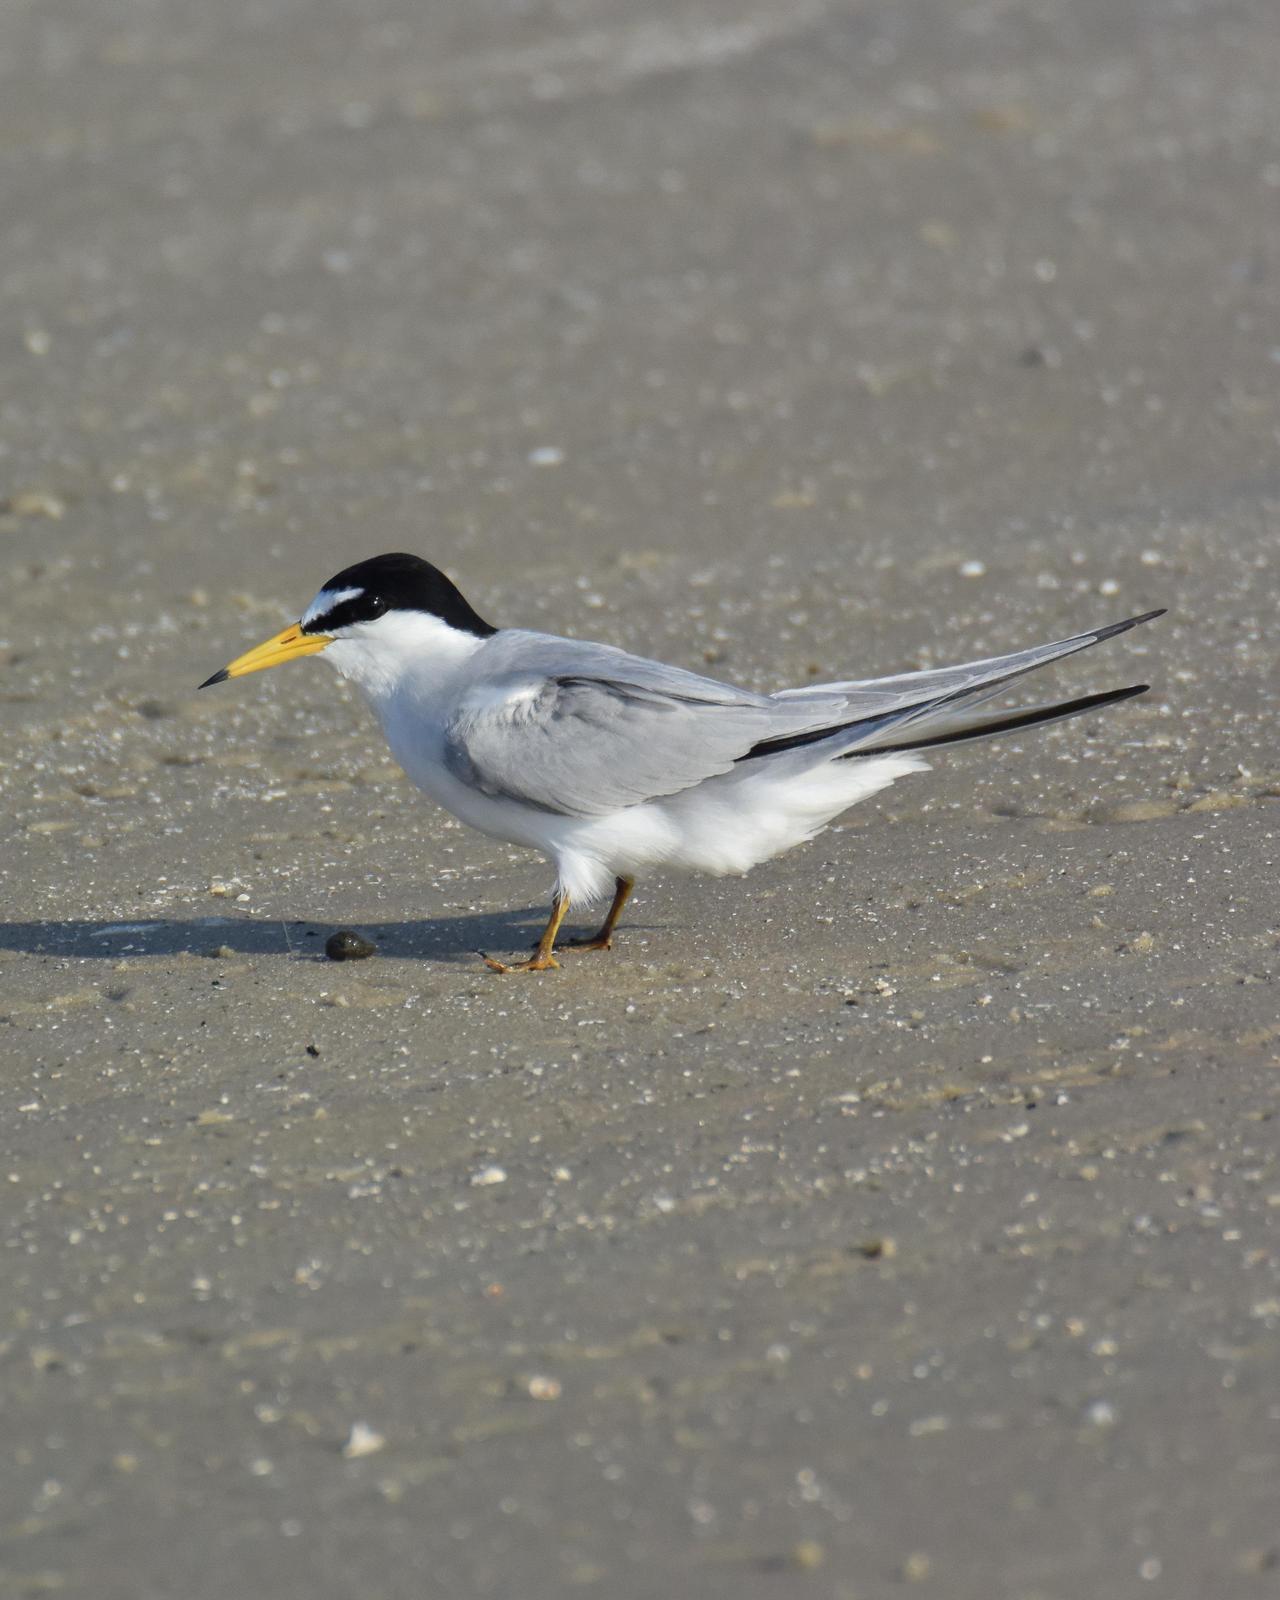 Least Tern Photo by Emily Percival